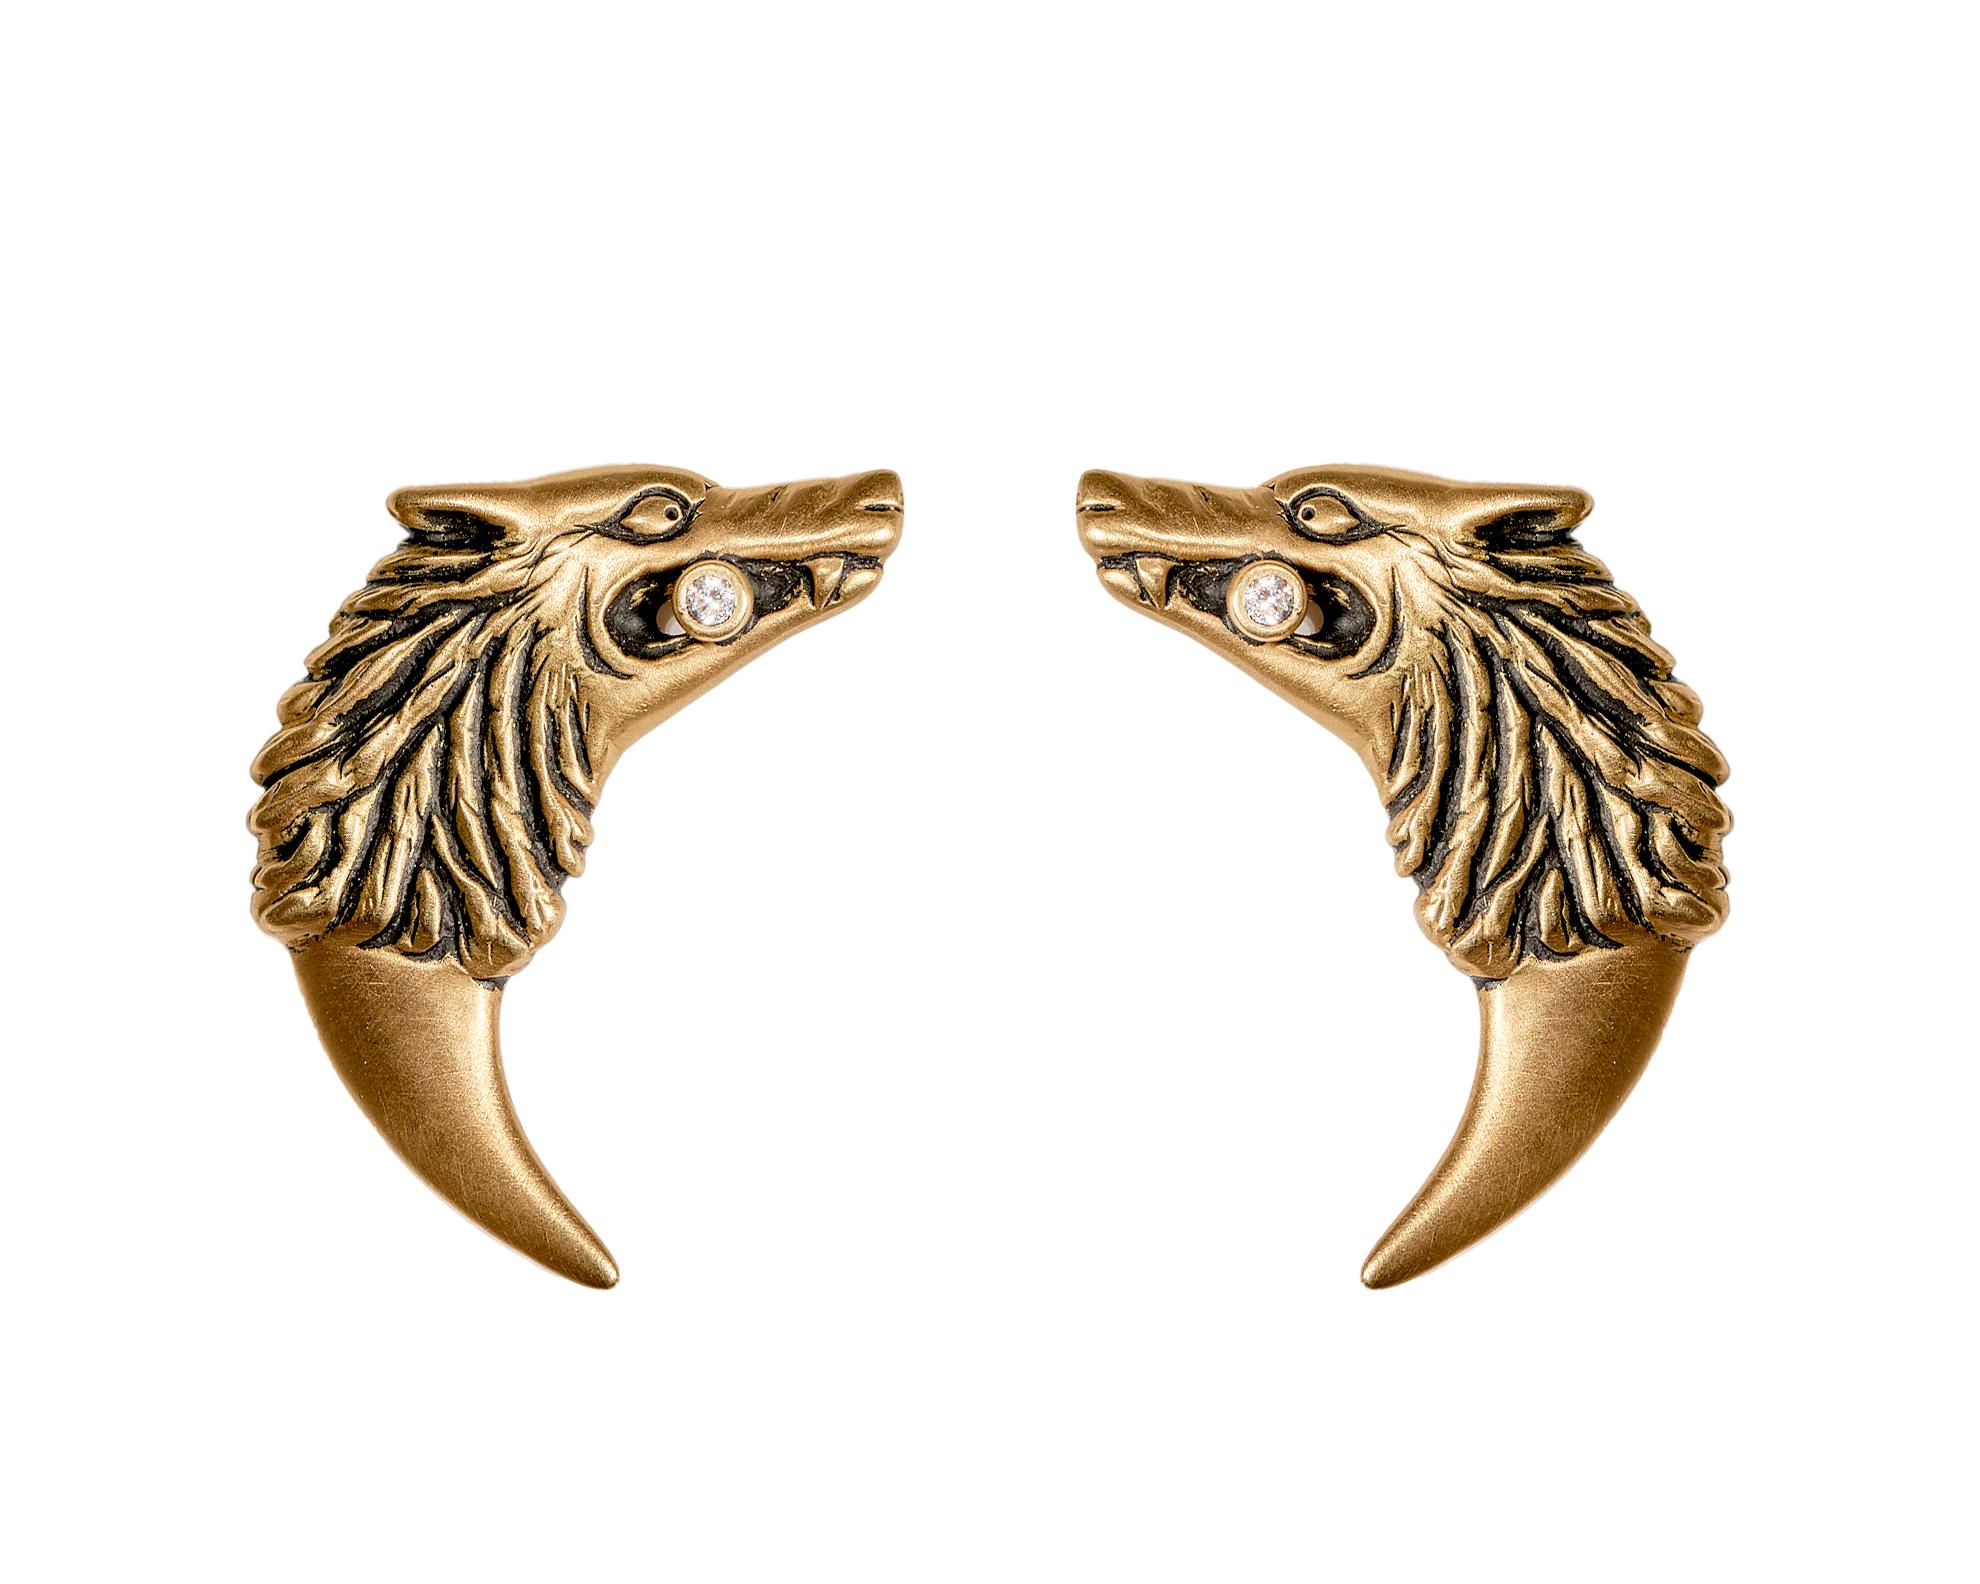 Like many of Wendy's designs, these curved wolf-fang earrings were inspired by a notable woman of history -- in this case, Isabella, the queen consort of Edward II in 14th century England. Edward was a poor ruler, leading Isabella and her lover to